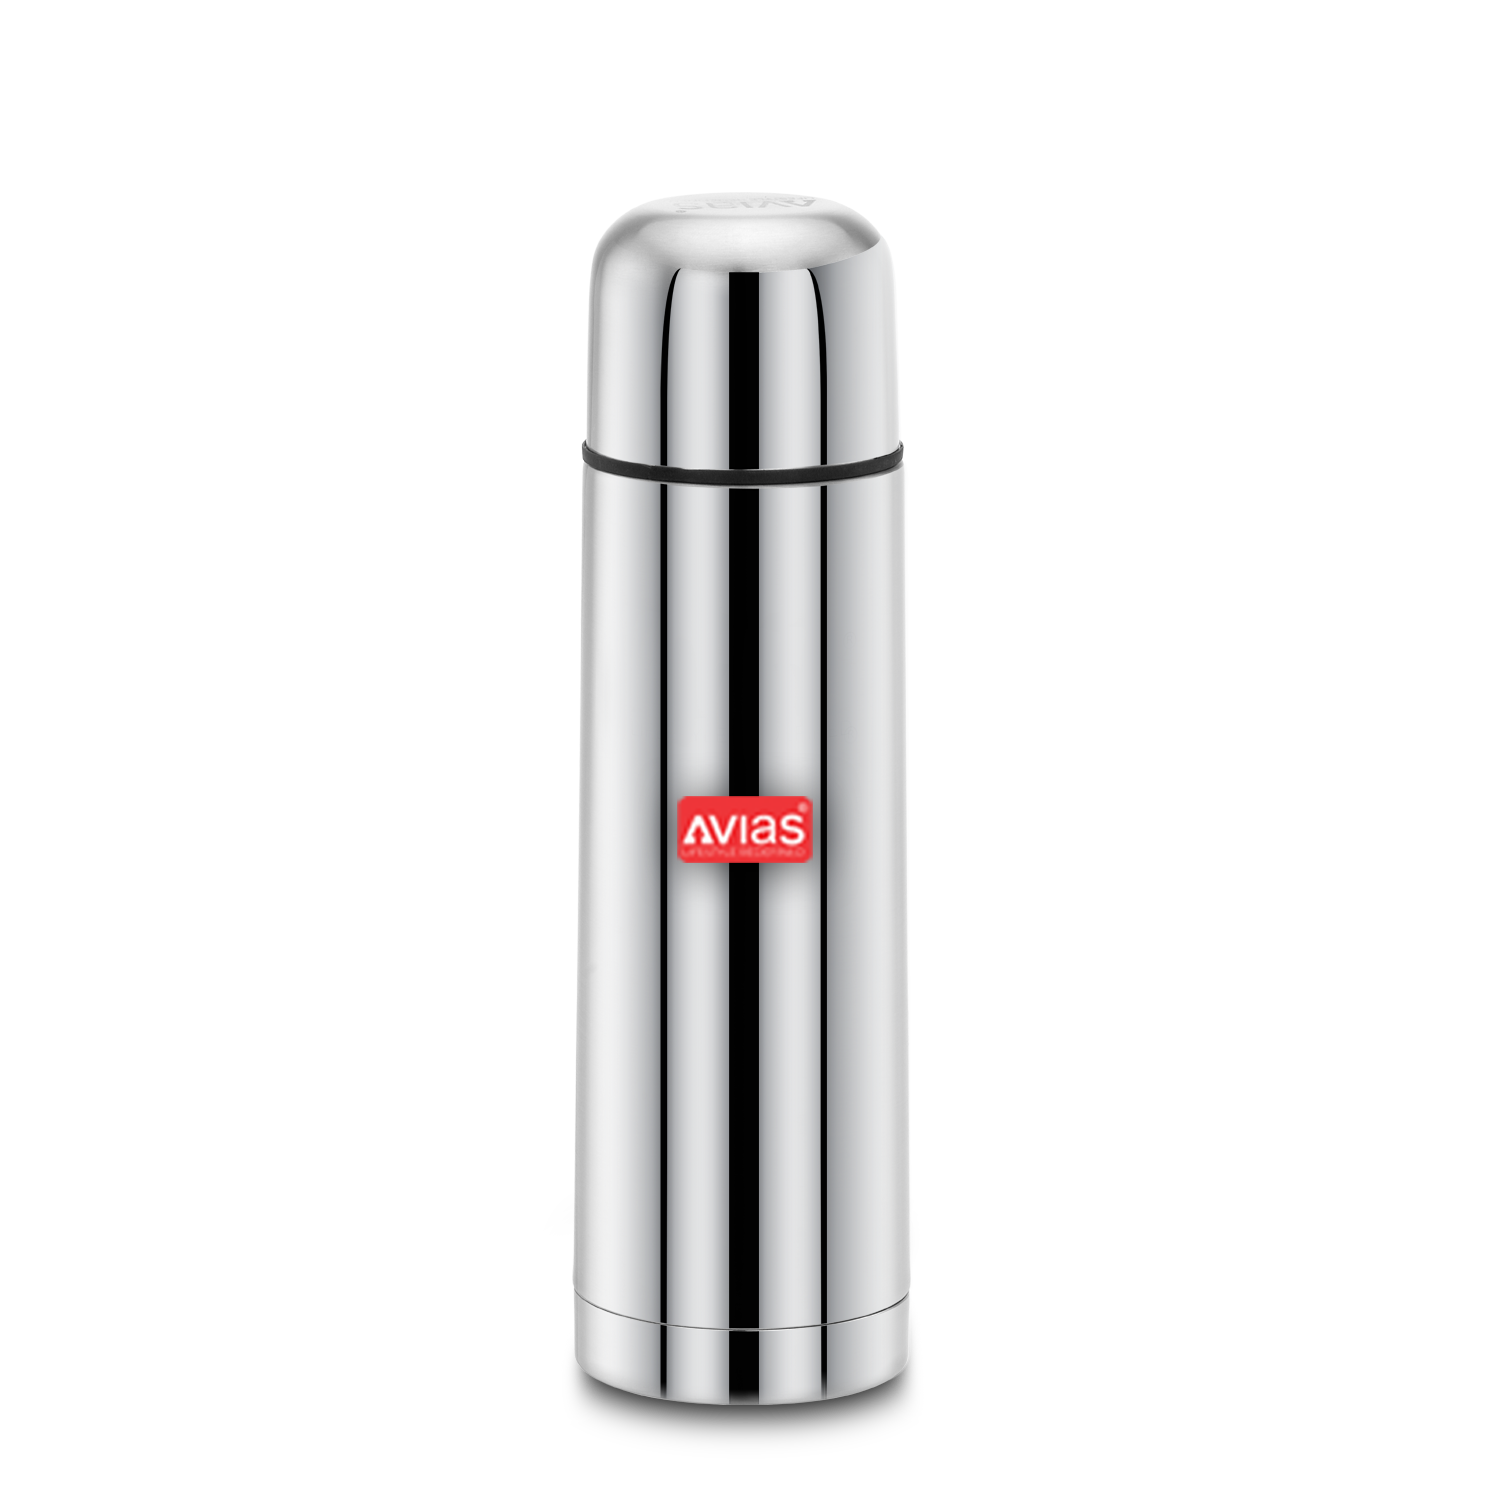 Avias stainless steel flask for drinking hot water